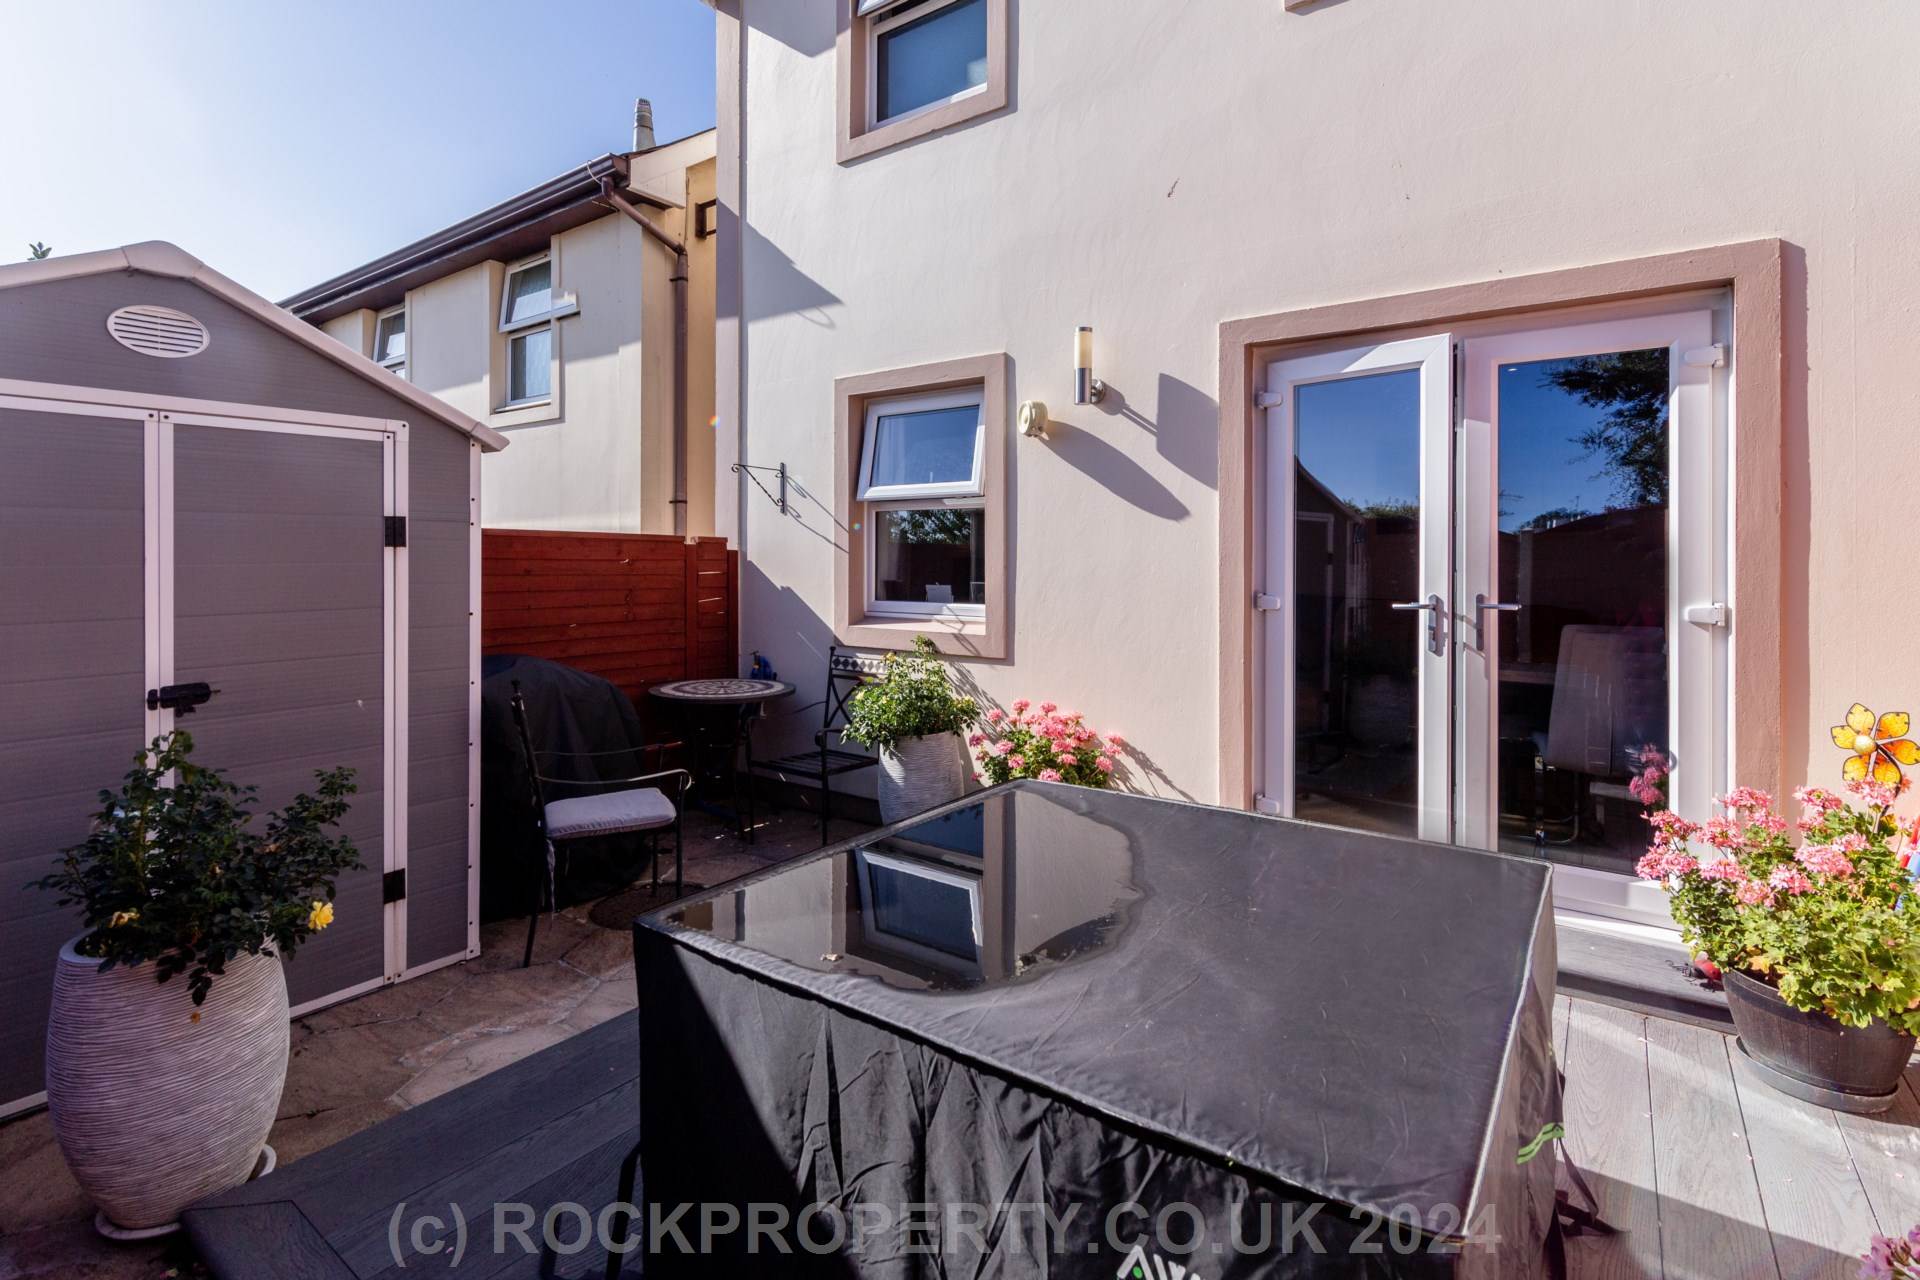 OFFERS INVITED - 2 BED HOUSE, Dunedin Farm, Outskirts of St Helier, Image 13